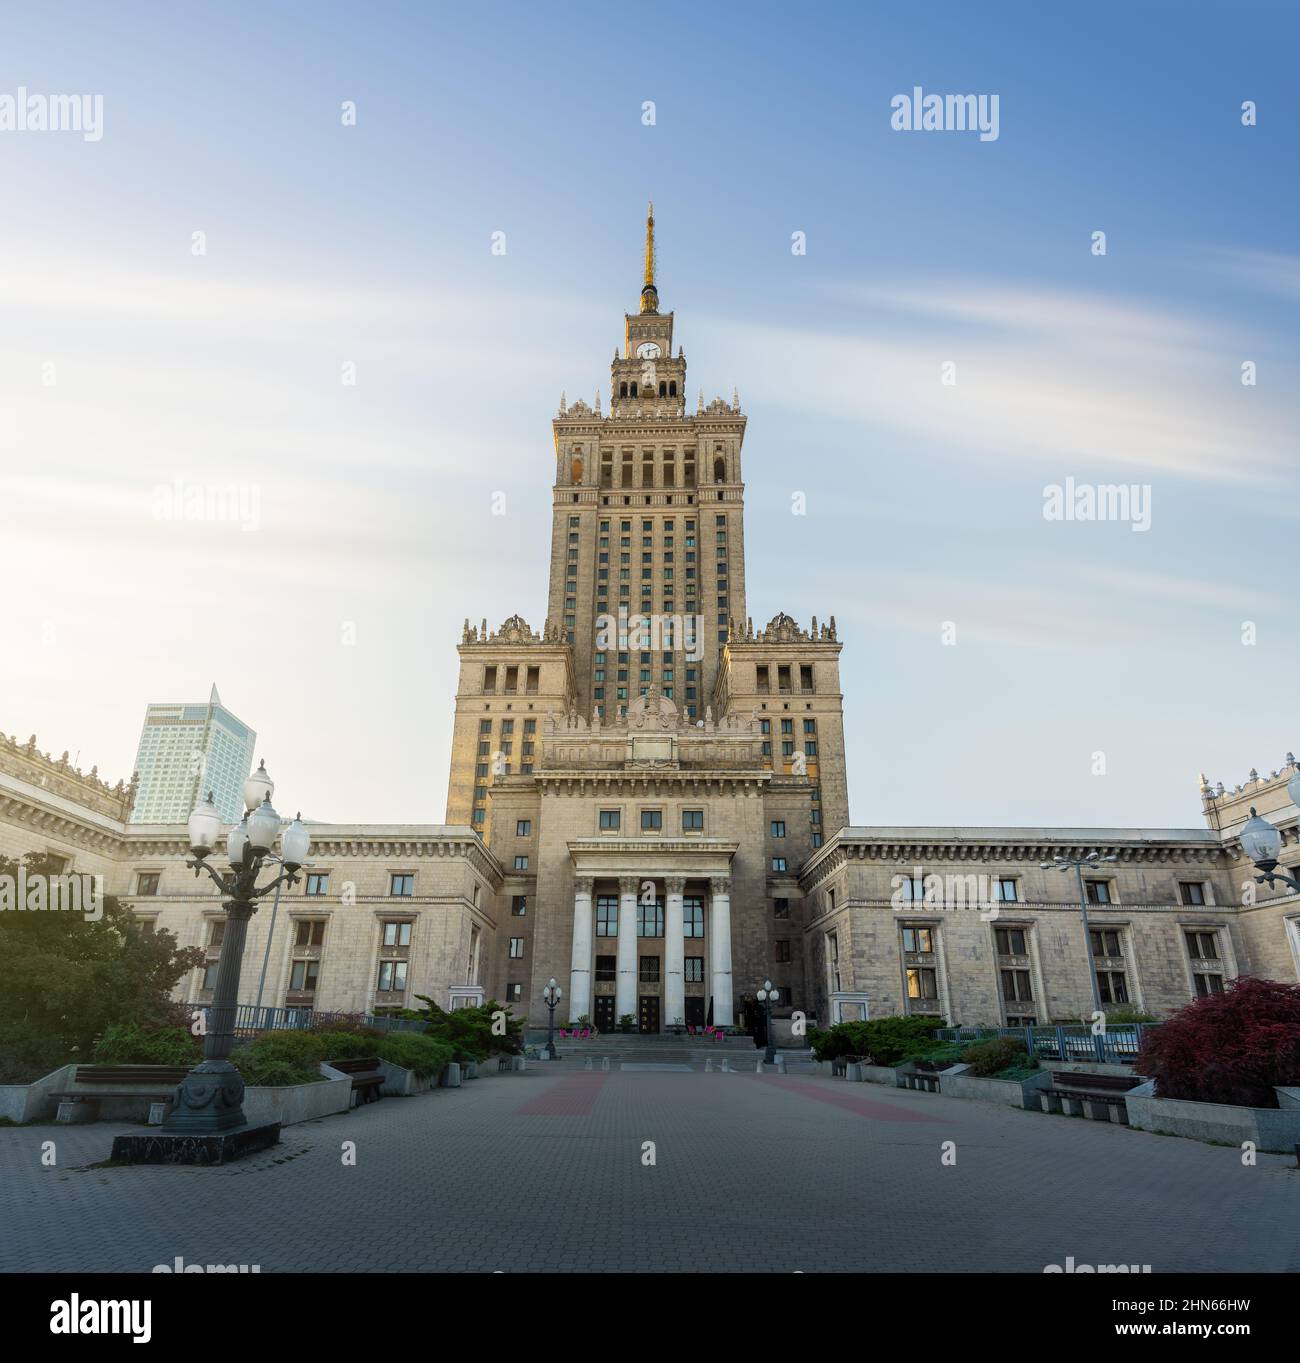 Palace of Culture and Science - Warsaw, Poland Stock Photo